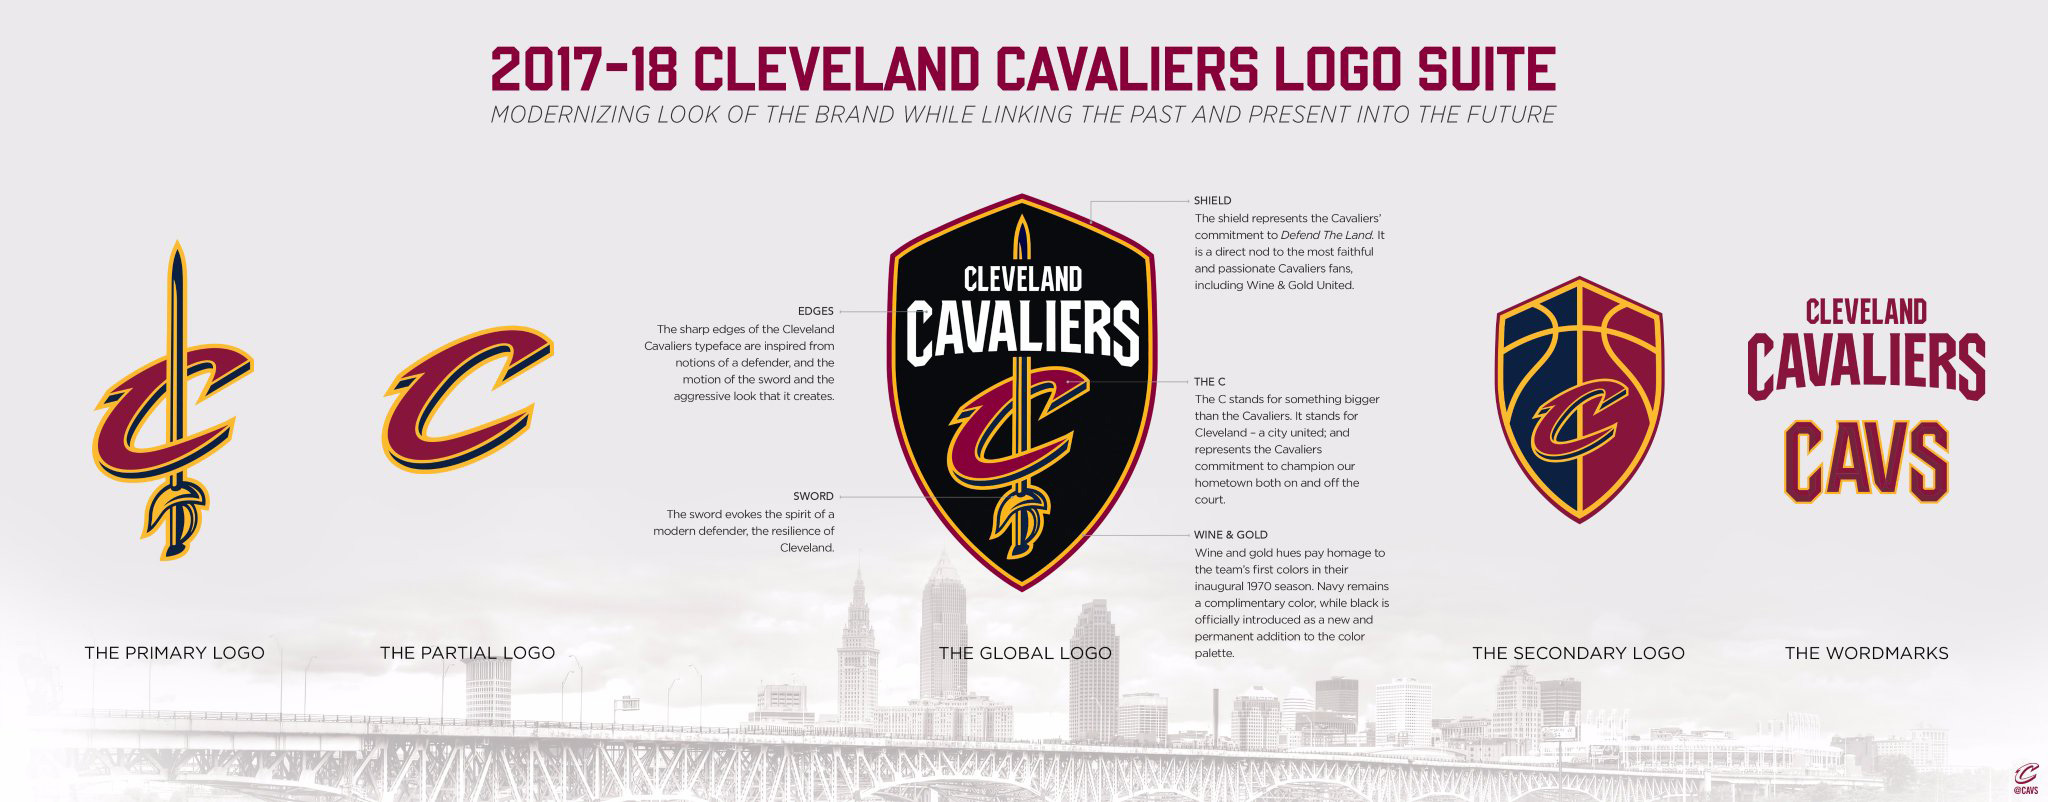 Brand New: New Logos for Cleveland Cavaliers by Nike Identity Group2048 x 802